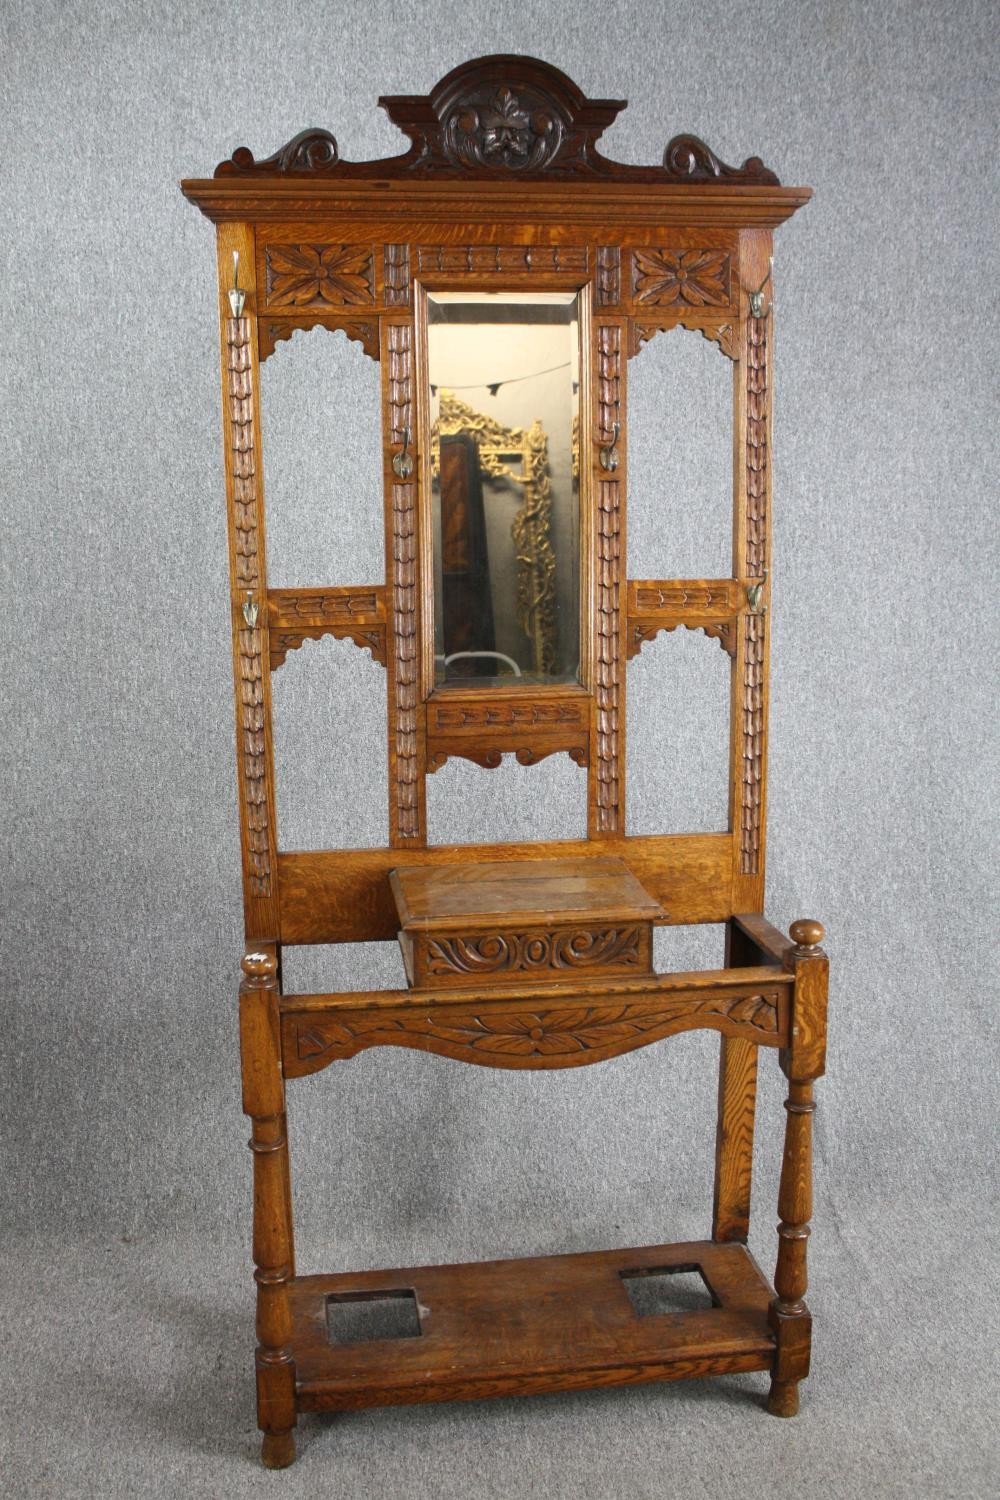 A Victorian period oak hall hat /coat and cane stand, dating from around 1890. With a shaped cornice